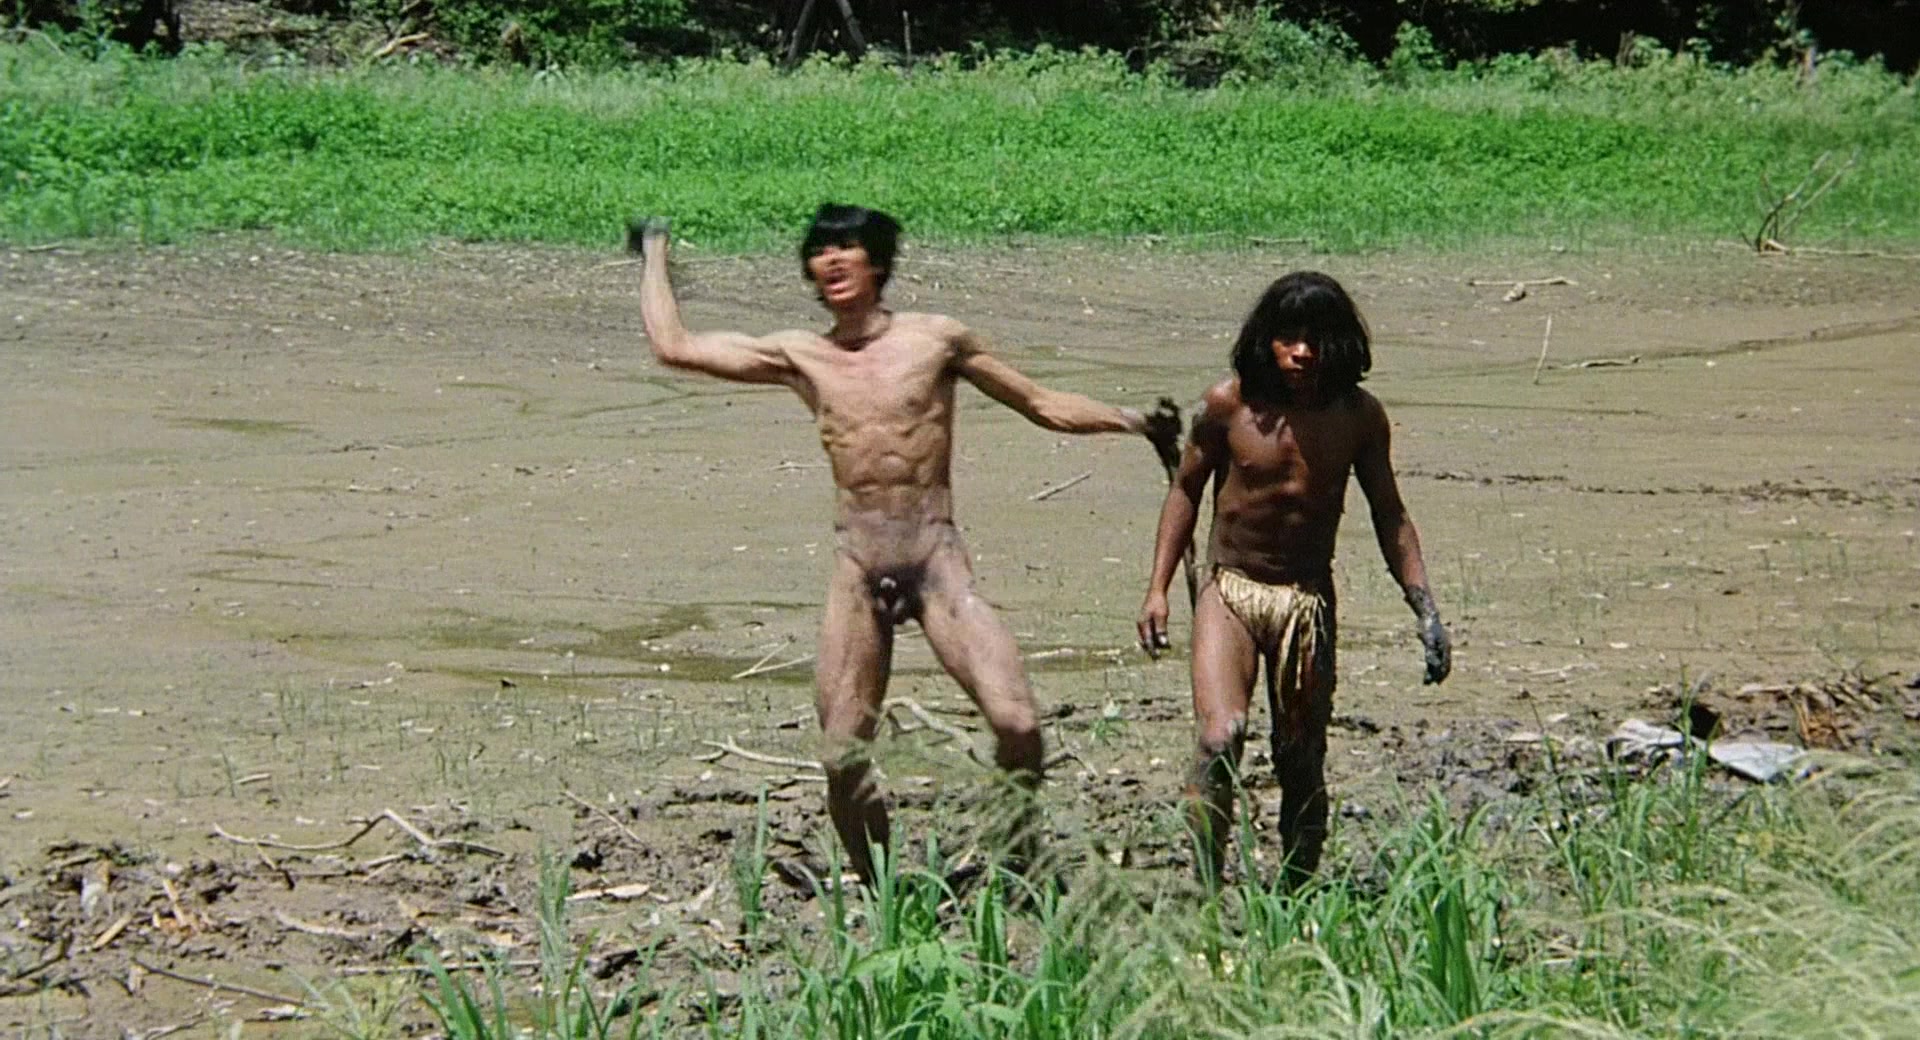 OMG He S Naked RETRO EDITION Ricardo Fuentes In CANNIBAL HOLOCAUST